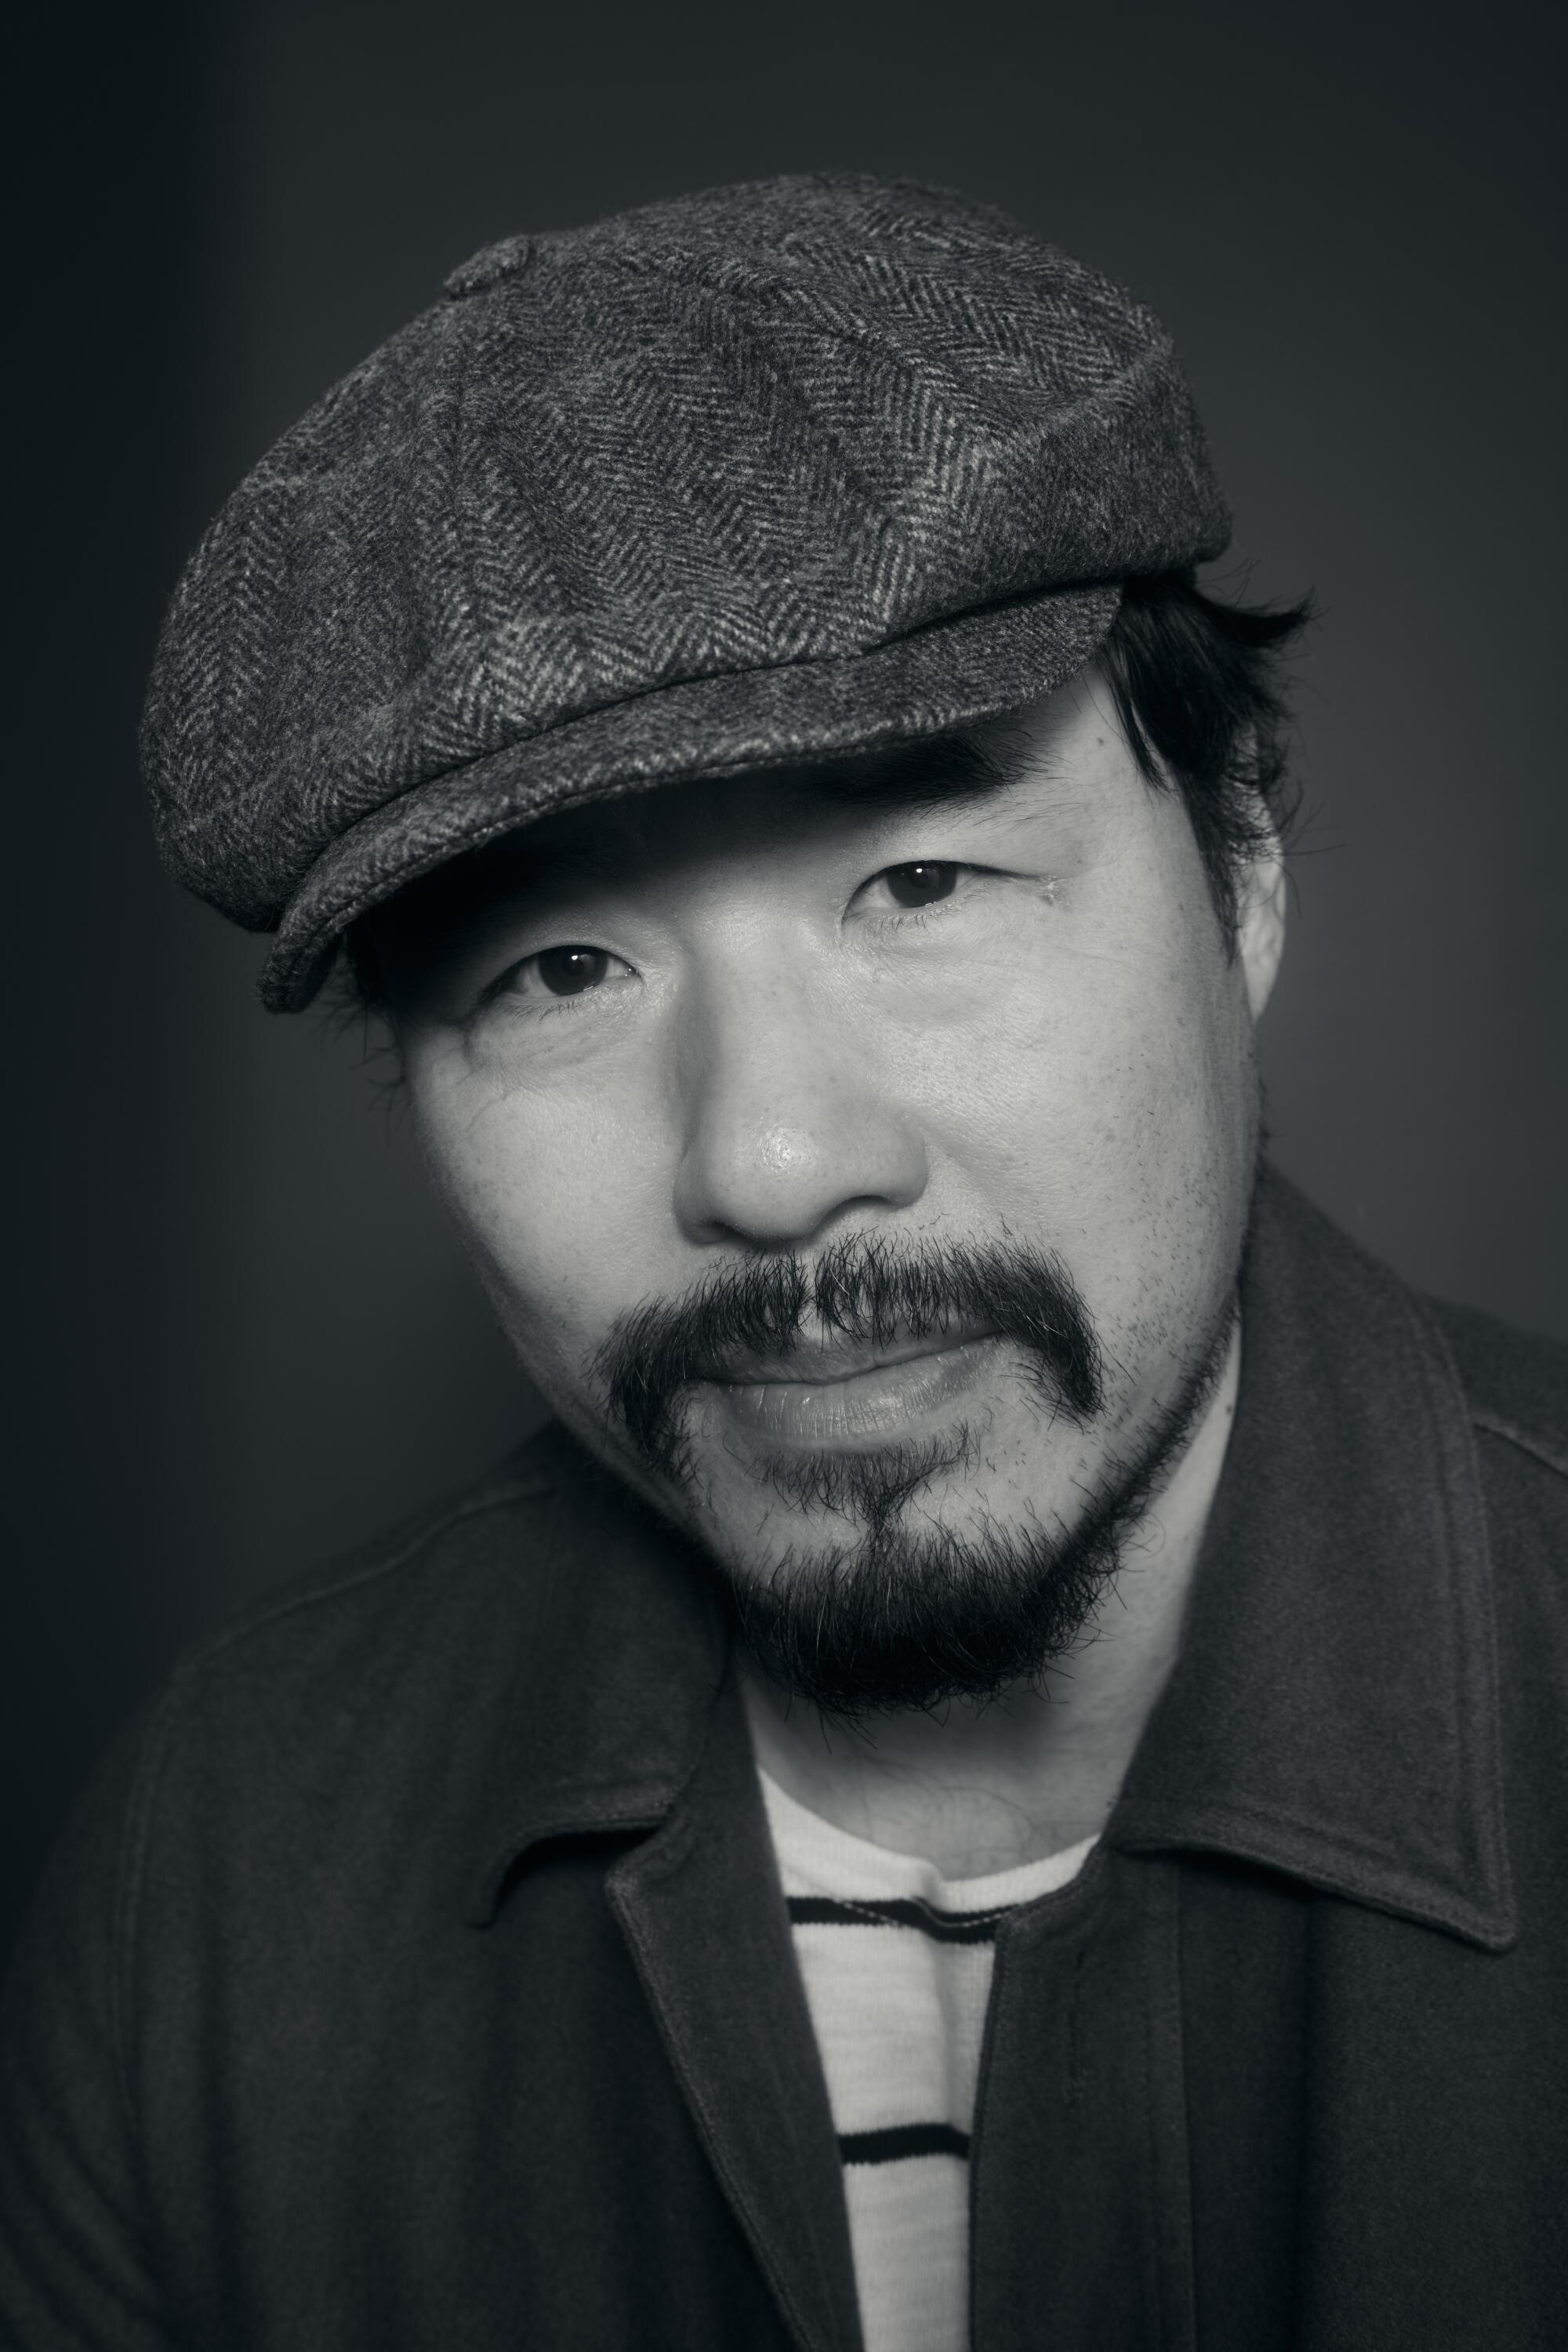 Randall Park in a hat.